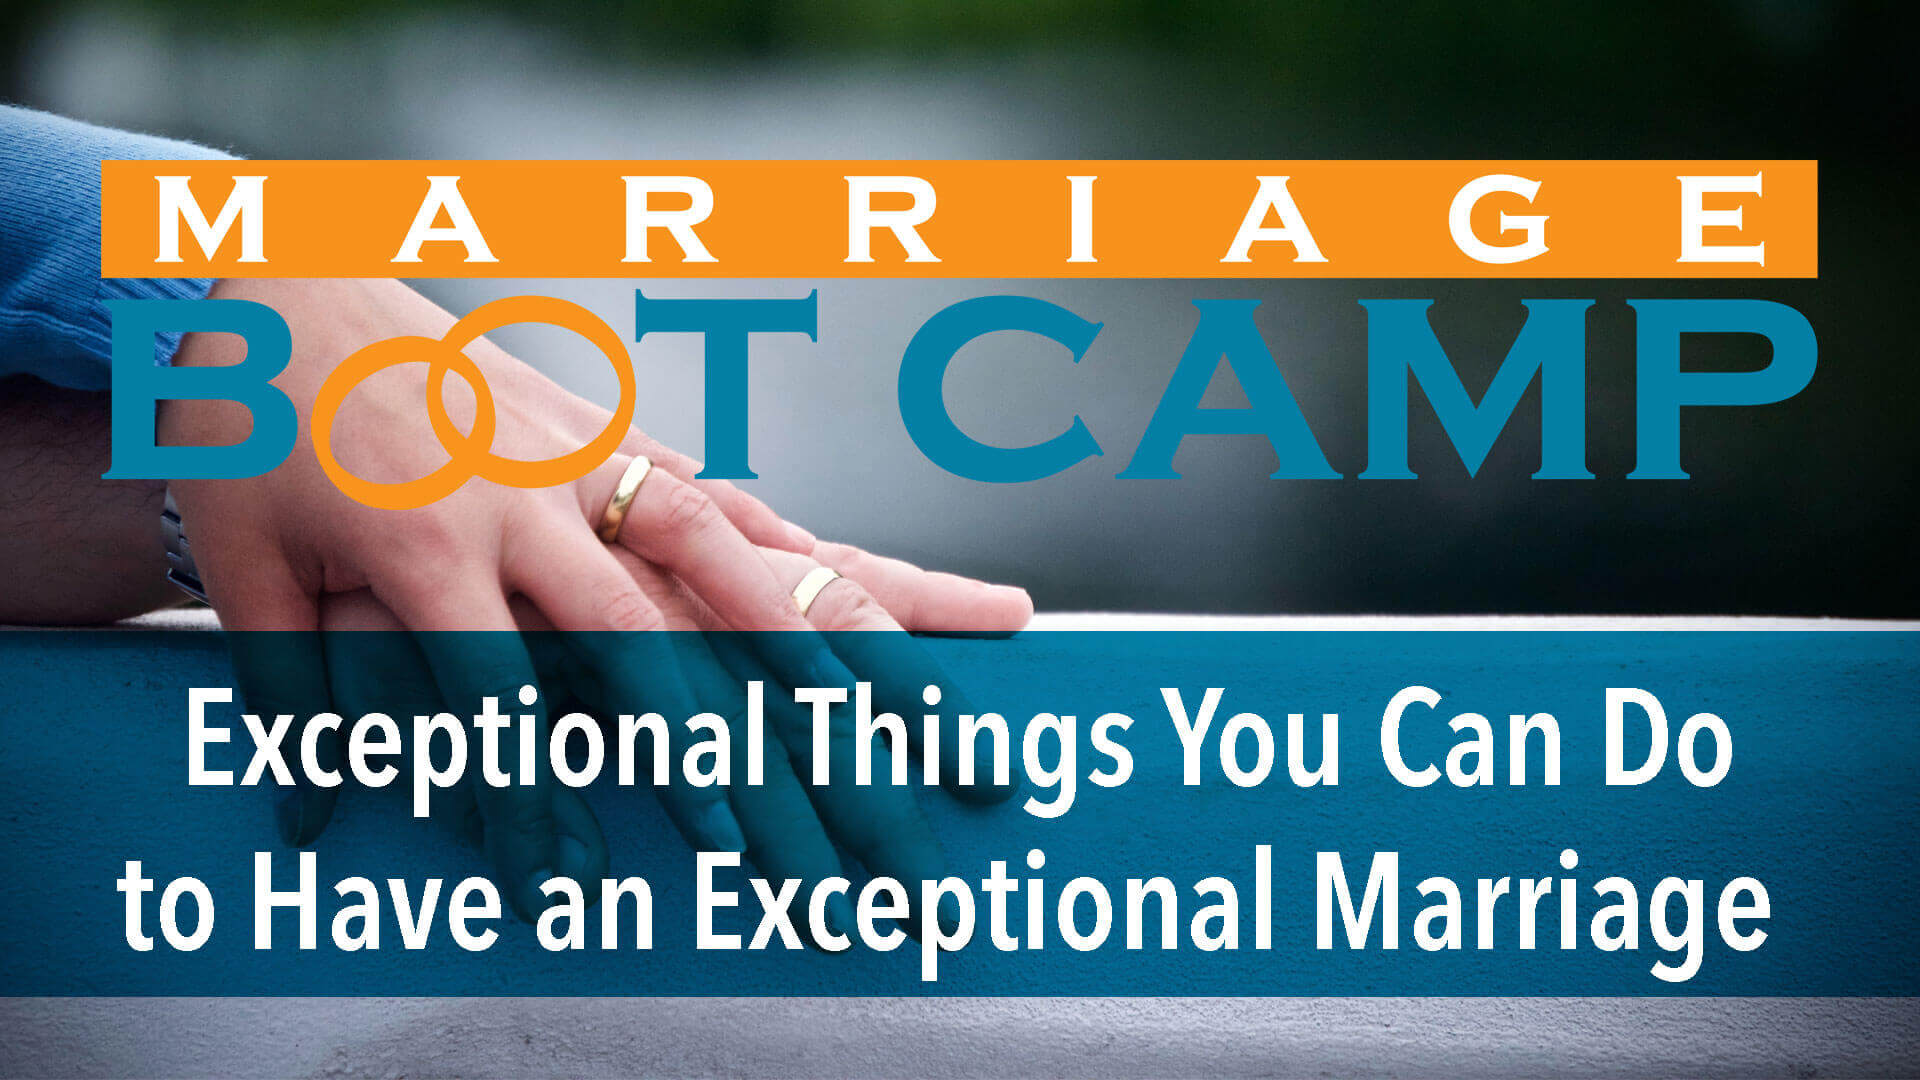 Exceptional Marriage